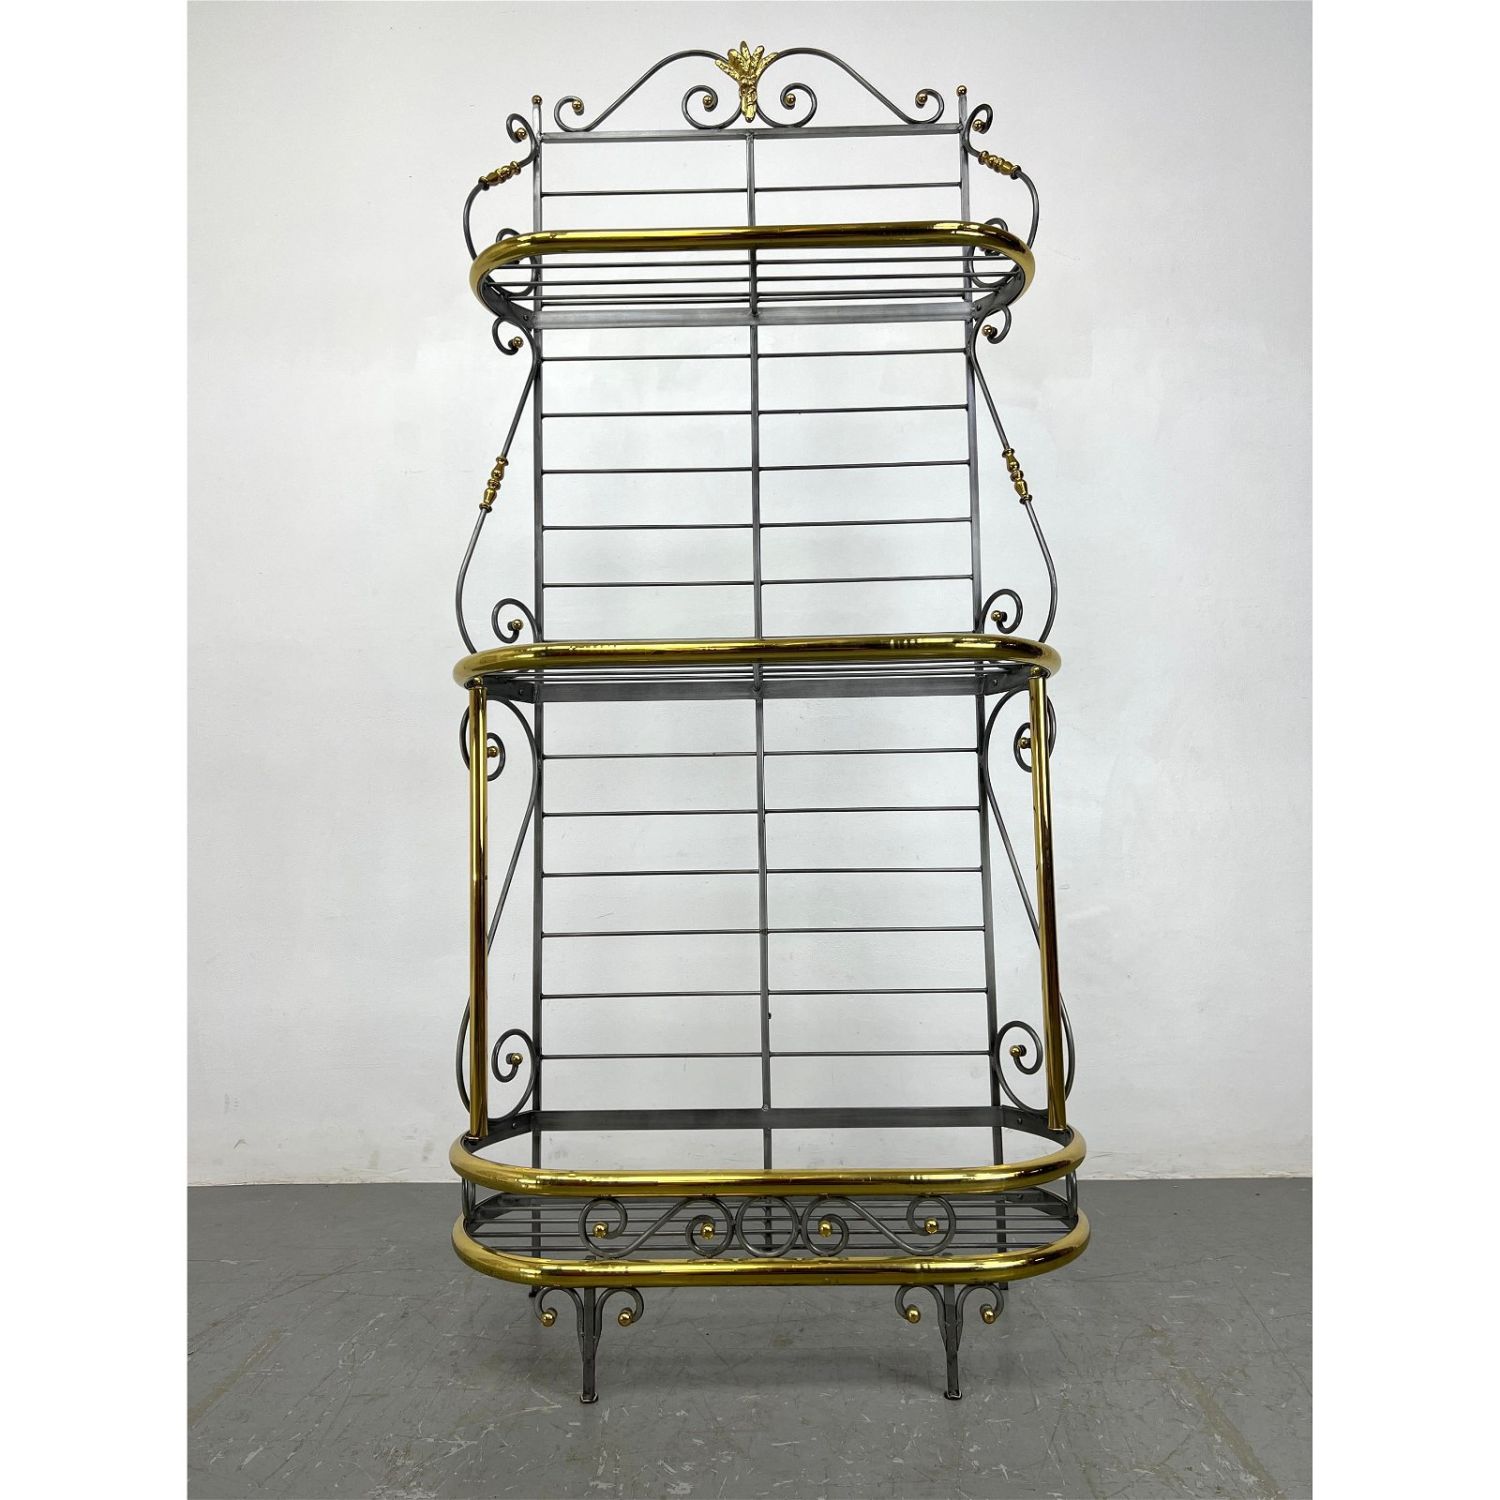 Iron and Brass Bakers Rack. Decorative